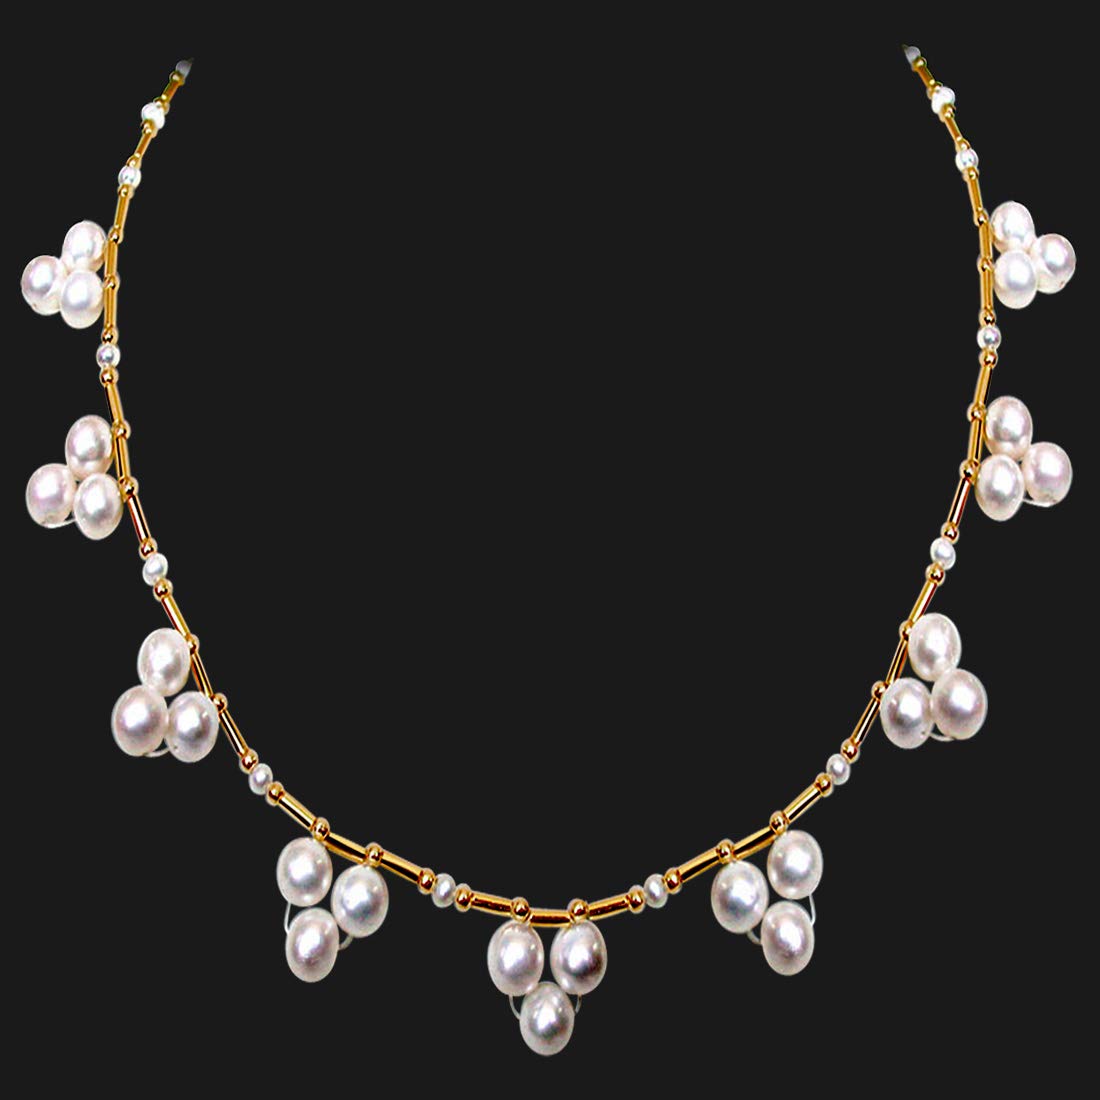 Angelic Beauty - Single Line Flower Design Real Freshwater Pearl Necklace for Women (SN143)